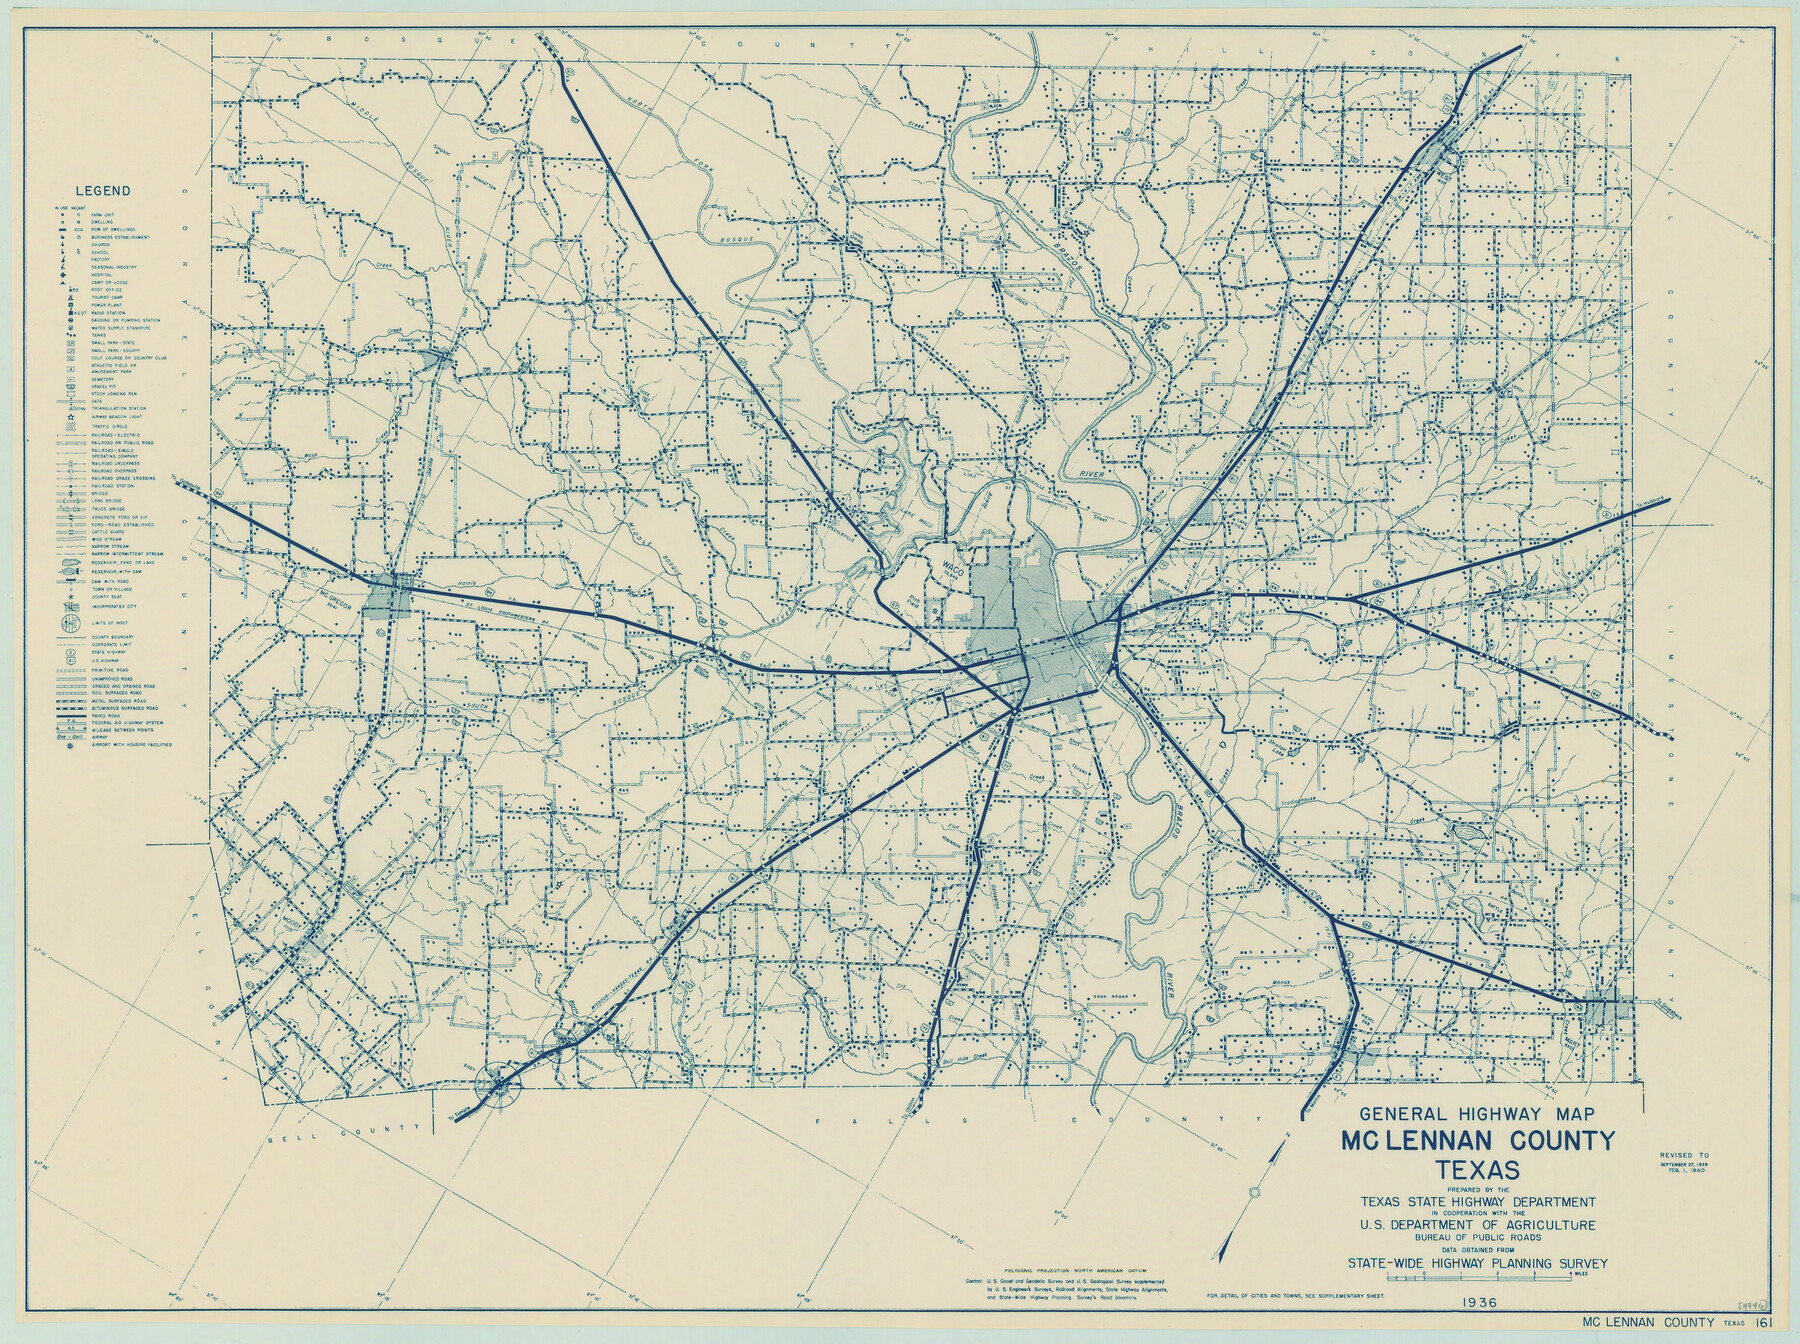 79191, General Highway Map, McLennan County, Texas, Texas State Library and Archives